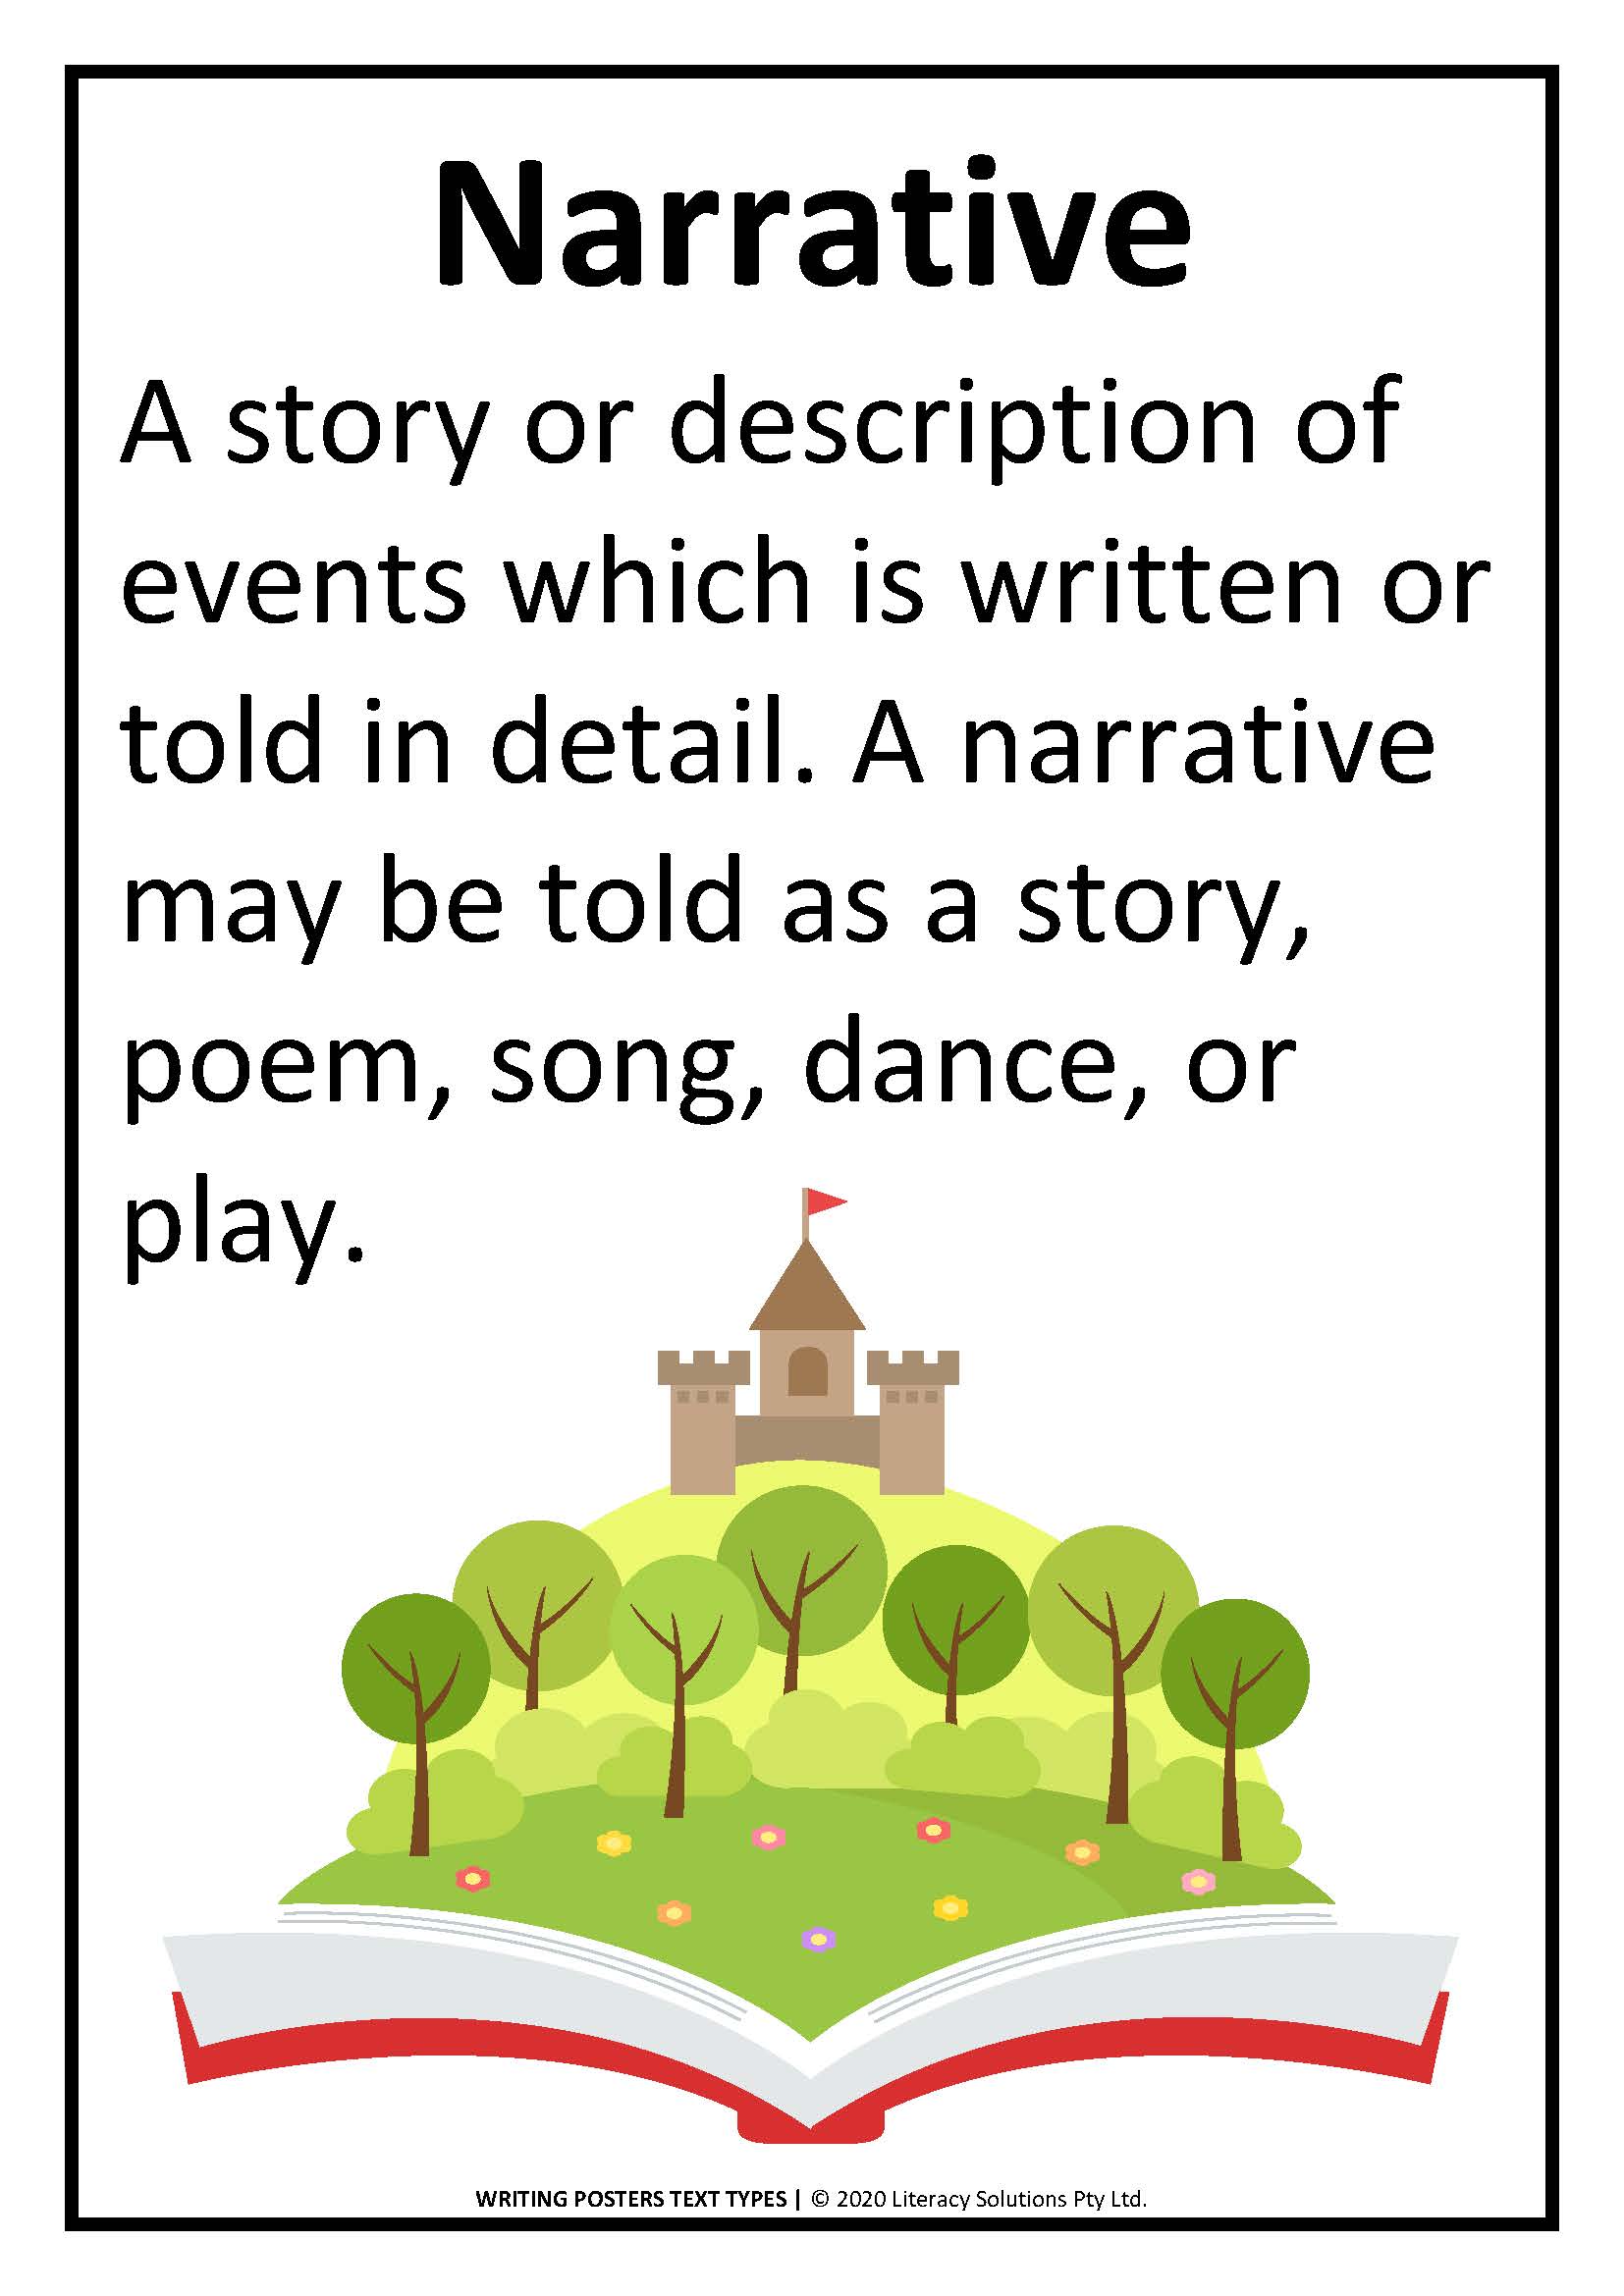 Writing: Text Types: Literacy Solutions